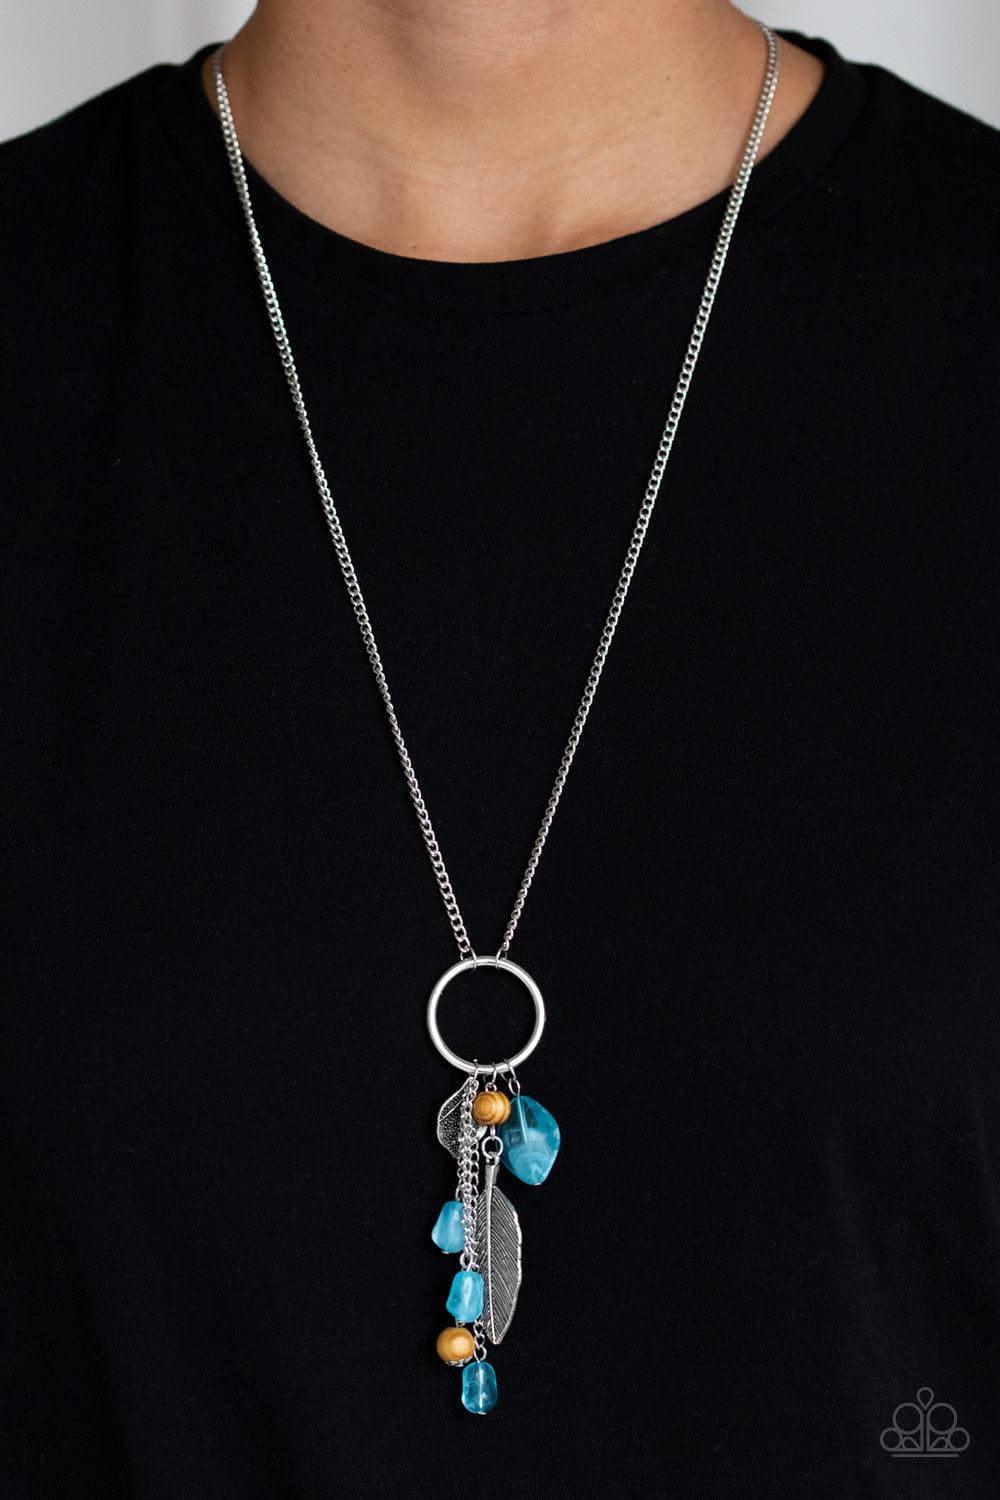 Paparazzi Accessories - Sky High Style - Blue Necklace - Bling by JessieK